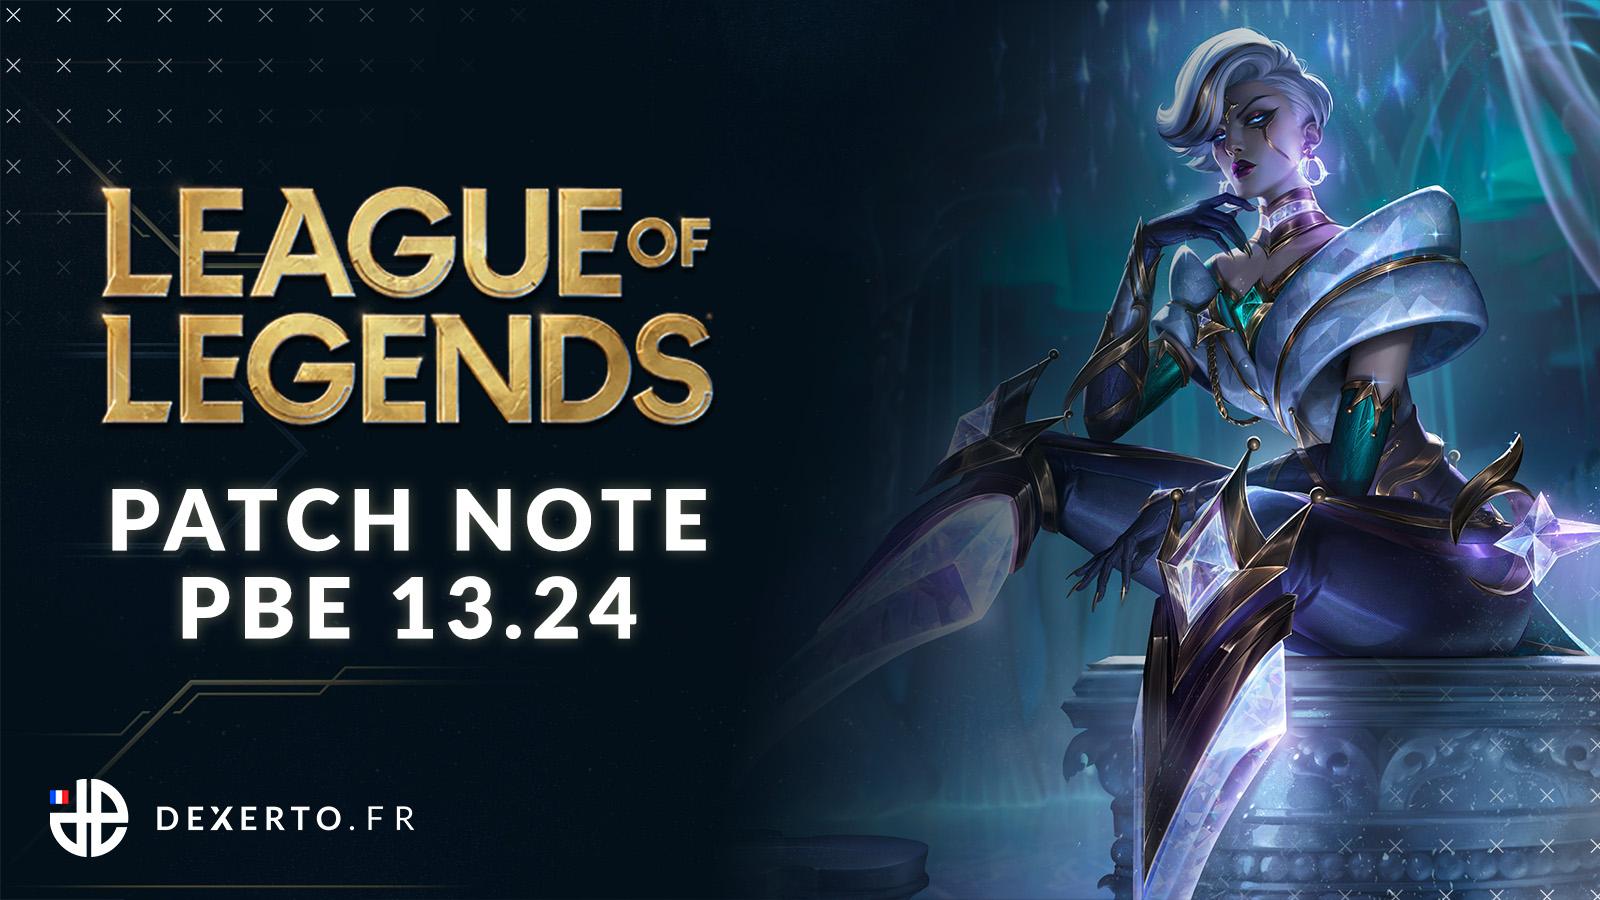 NERFPLZ.LOL Official Patch 13.24 Patch Notes Released!